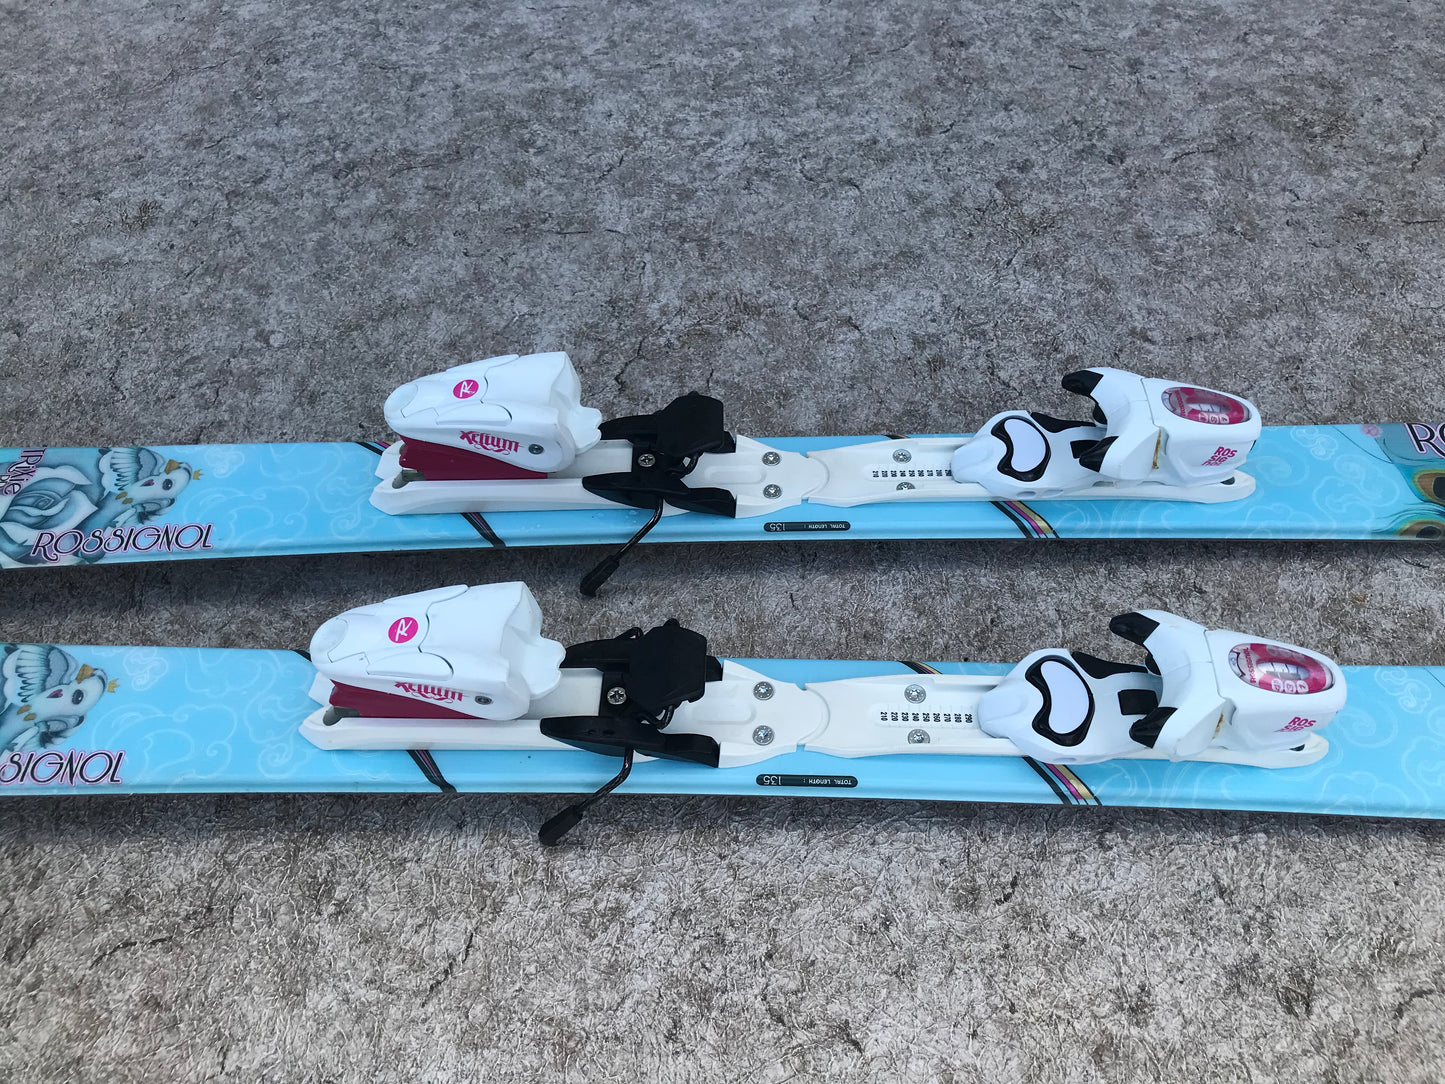 Ski 135 Rossignol Trixie Twin Tip Free Ride Parabolic Blue Pink With Bindings Excellent